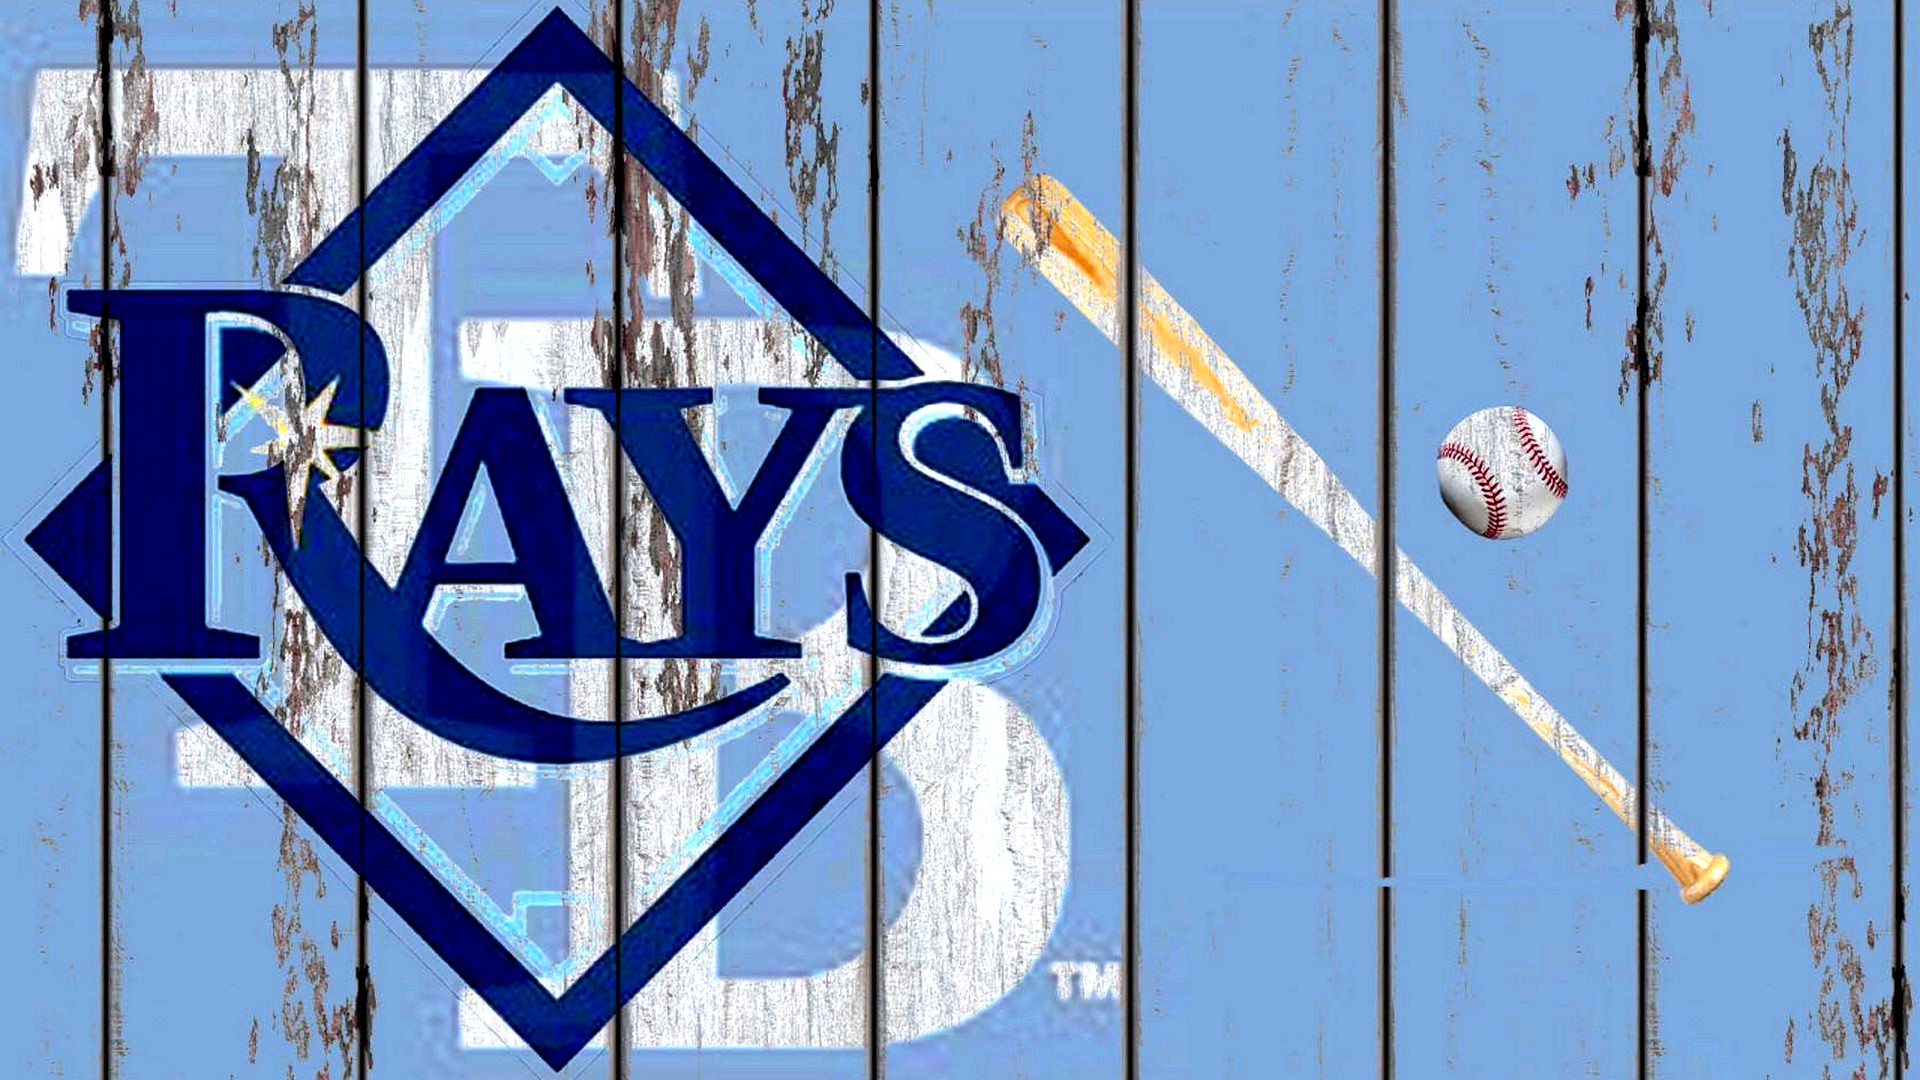 Tampa Bay Rays Logo Wallpaper For Mac OS with high-resolution 1920x1080 pixel. You can use this wallpaper for Mac Desktop Wallpaper, Laptop Screensavers, Android Wallpapers, Tablet or iPhone Home Screen and another mobile phone device